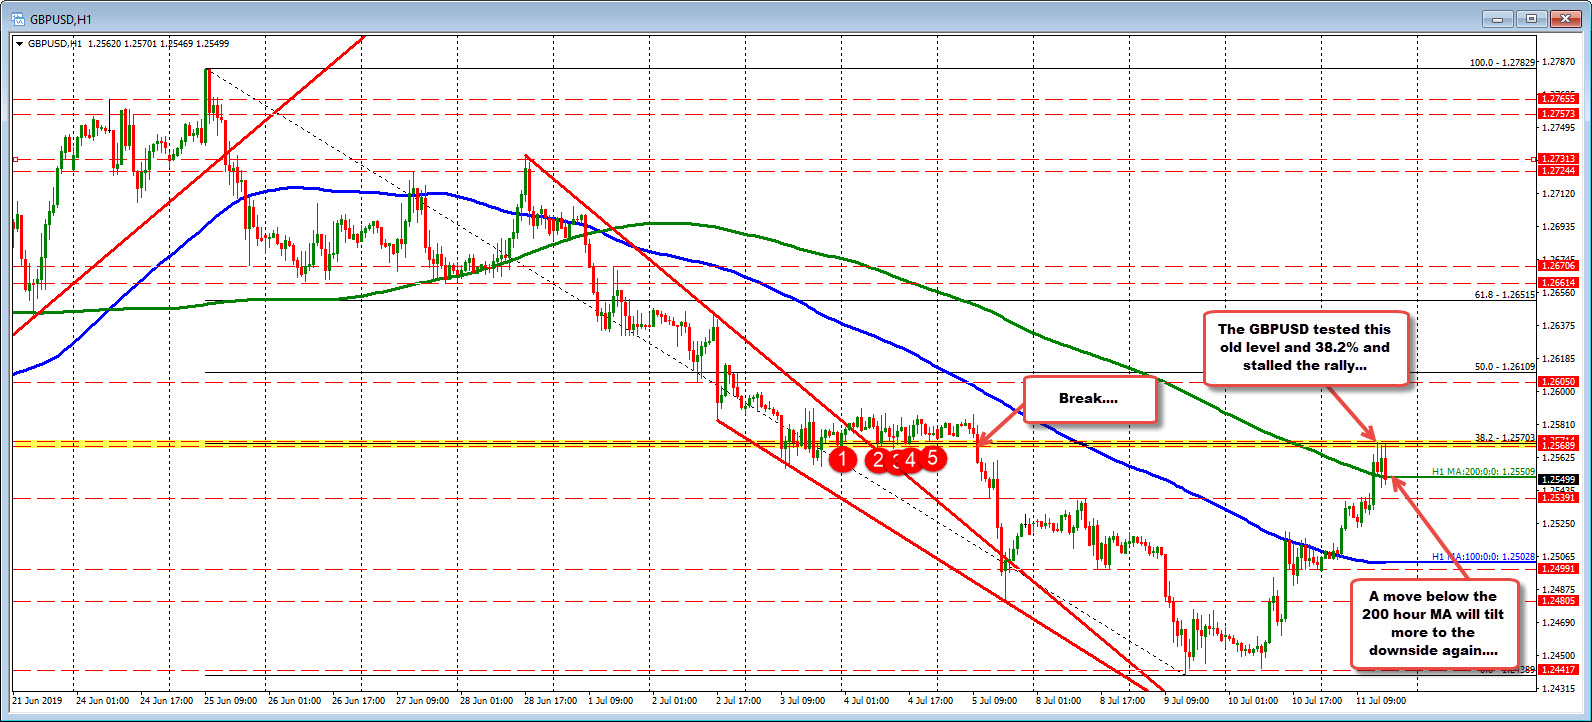 A ceiling at 1.2570 and 38.2% retracement as well stalls the rise